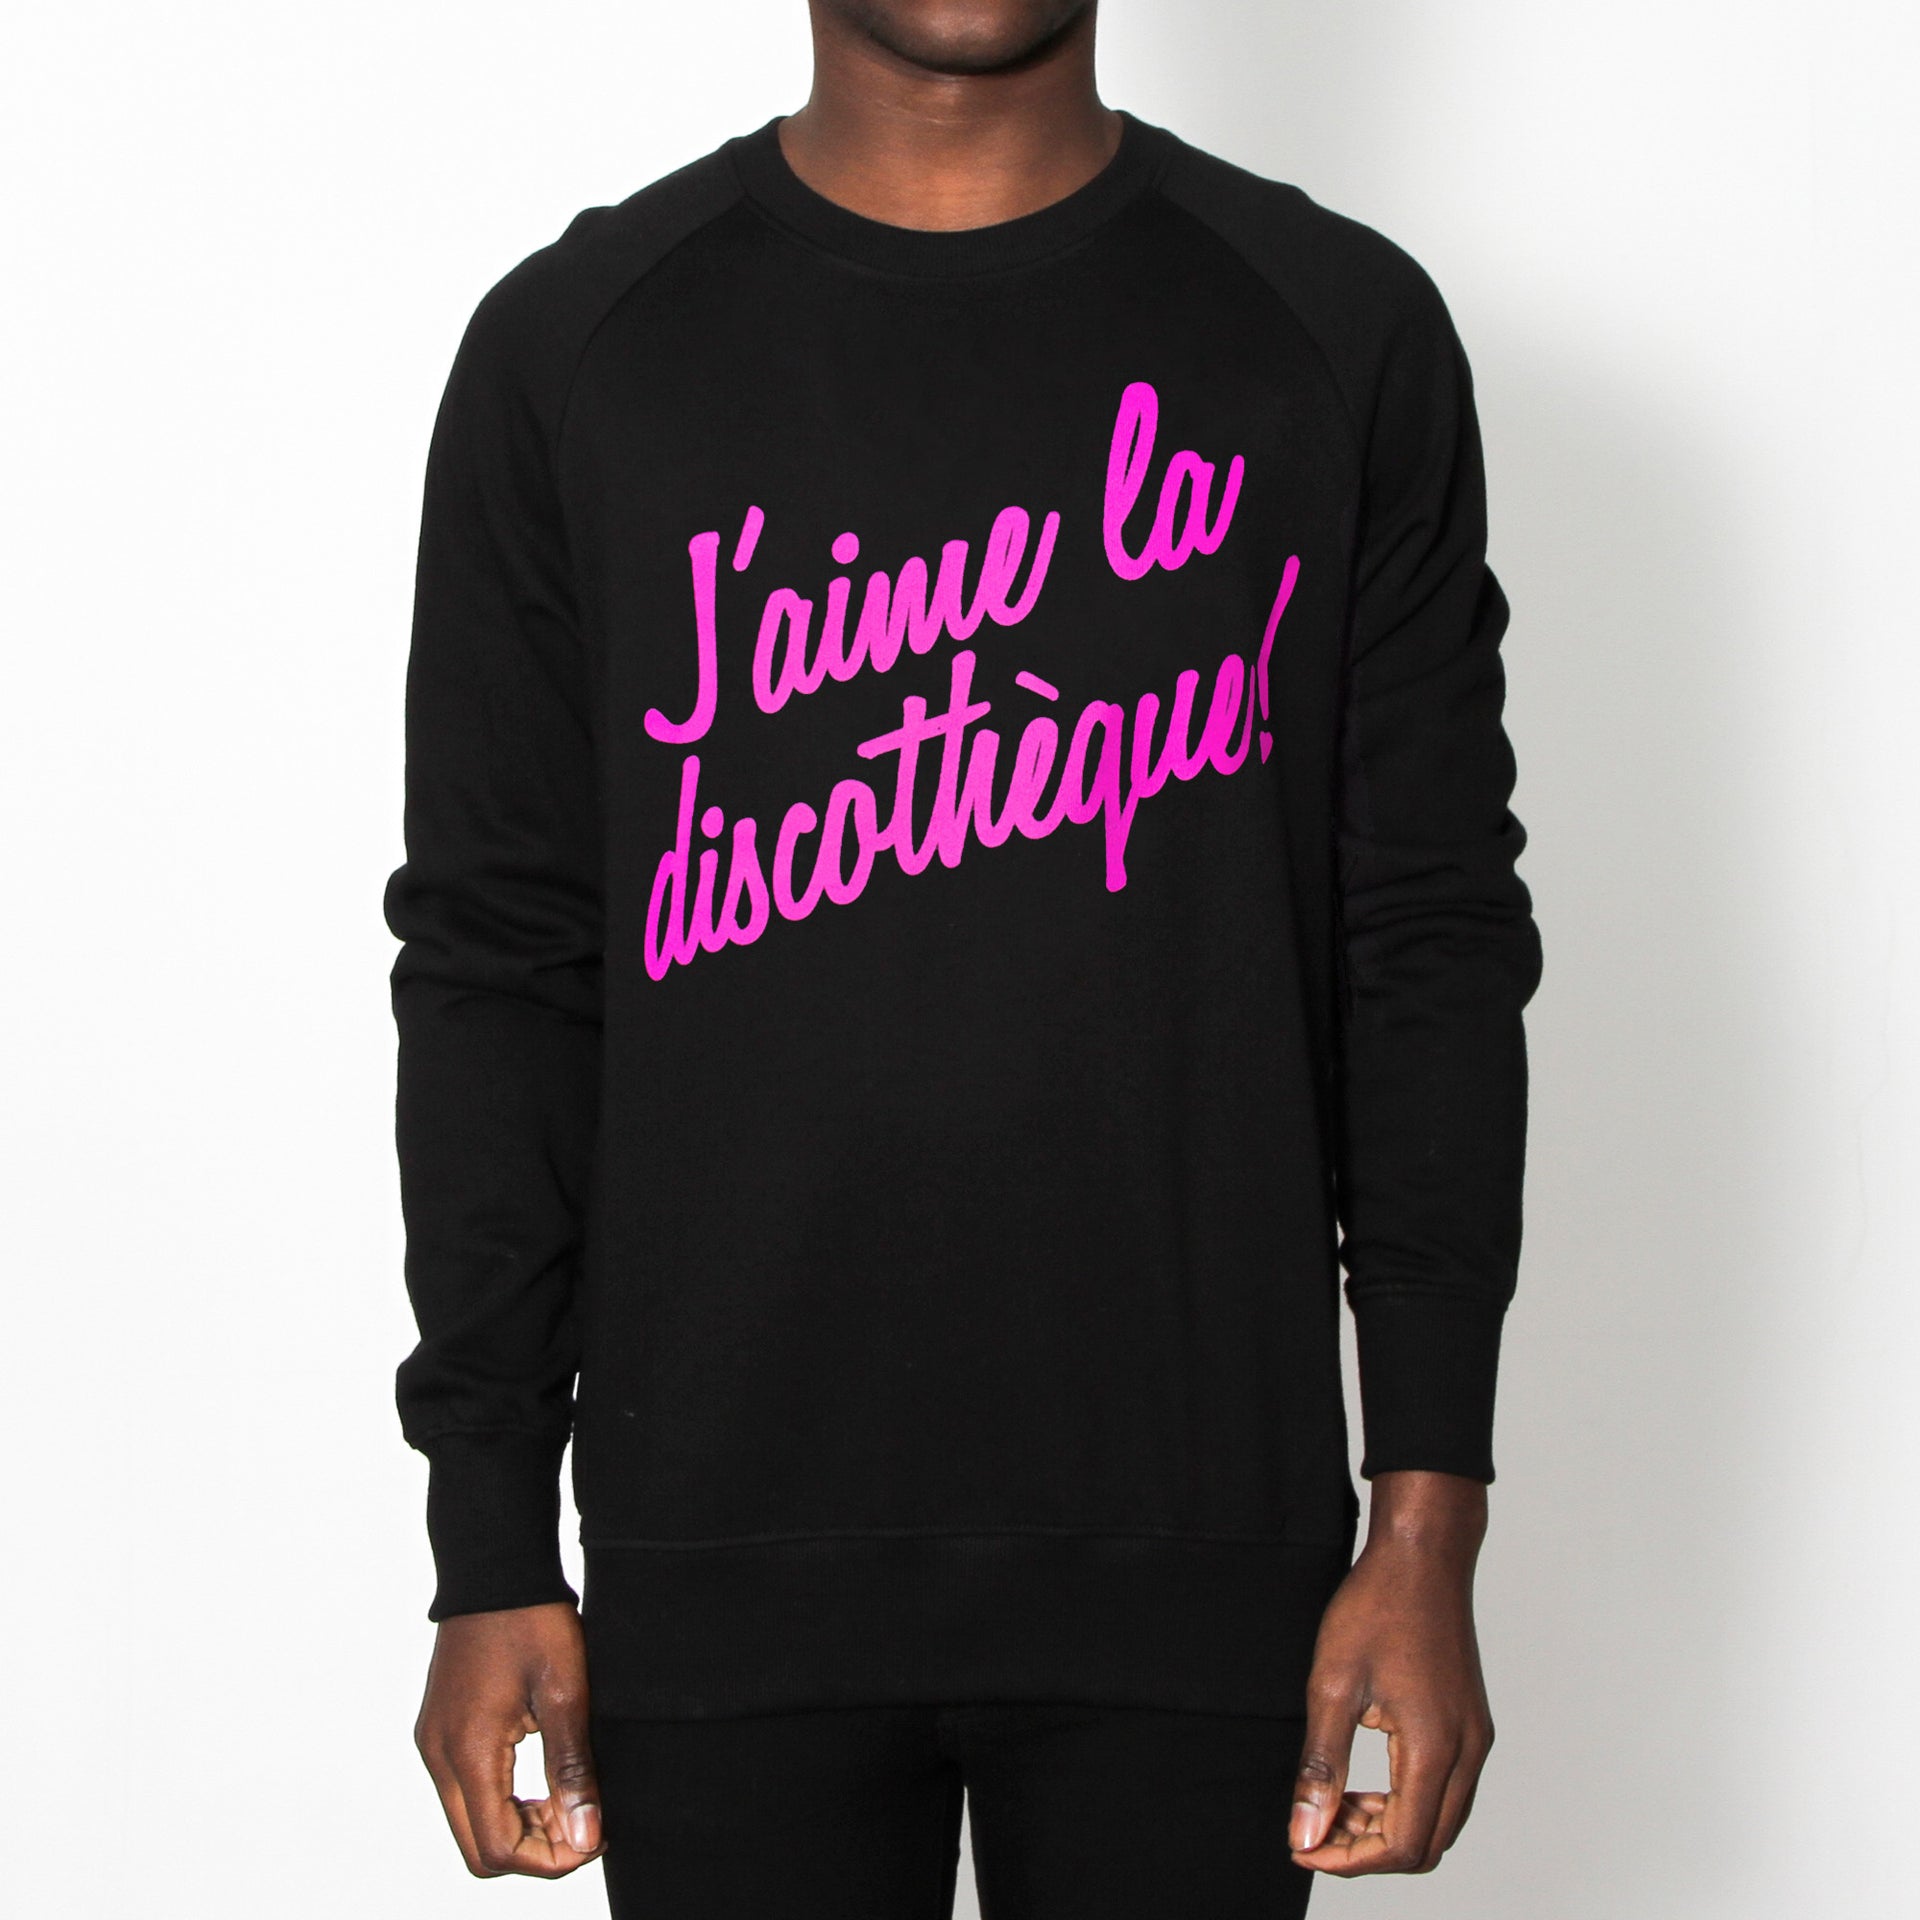 J'aime Discotheque - Sweatshirt - Black - Wasted Heroes